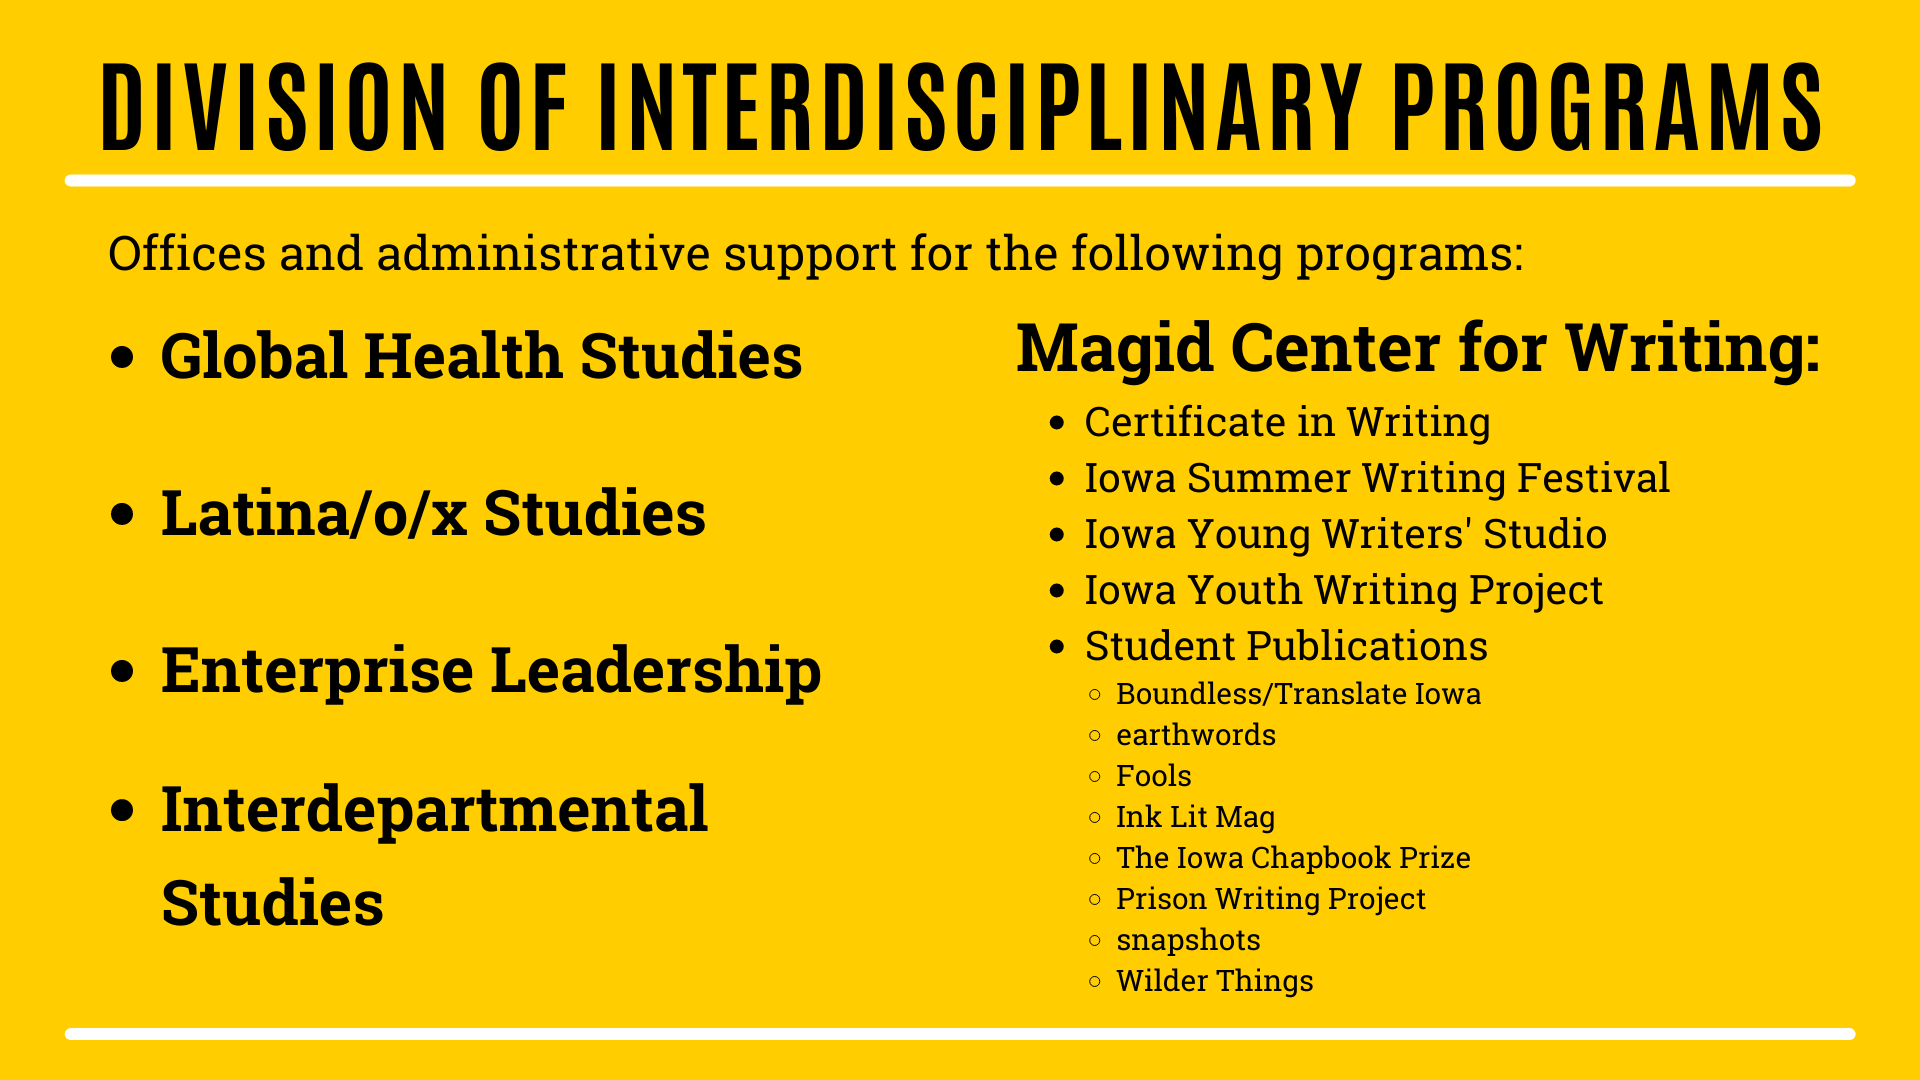 List of programs in the Division of Interdisciplinary Programs: Global Health Studies, Latina/o/x Studies, Enterprise Leadership, Interdepartmental Studies. Also provides services for Magid Center for Writing, Certificate in Writing, Iowa Summer Writing Festival, Iowa Young Writers' Studio, Iowa Youth Writing Project, and Student Publications, including Boundless/Translate Iowa, earthwords, Fools, Ink Lit Mag, The Iowa Chapbook Prize, Prison Writing Project, snapshots, and Wilder Things.